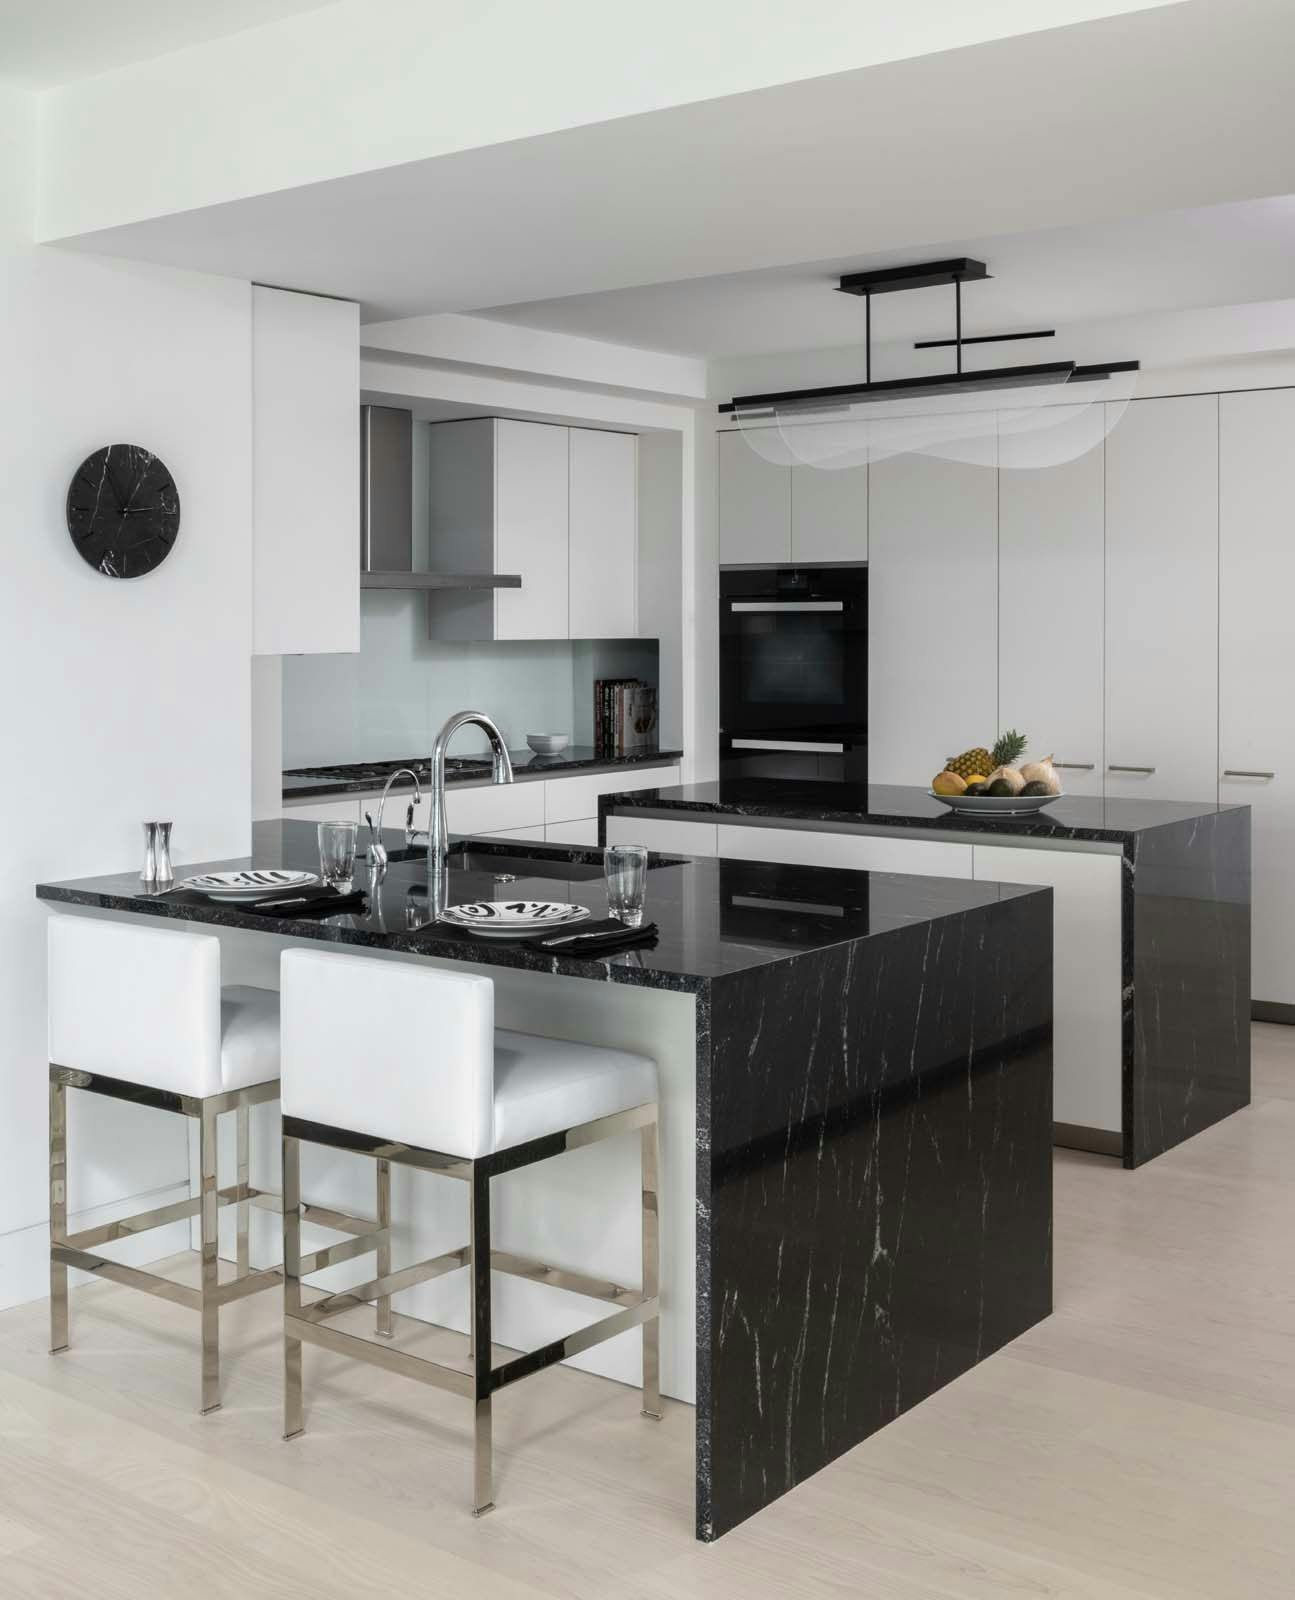 Somerset kitchen area with black accents